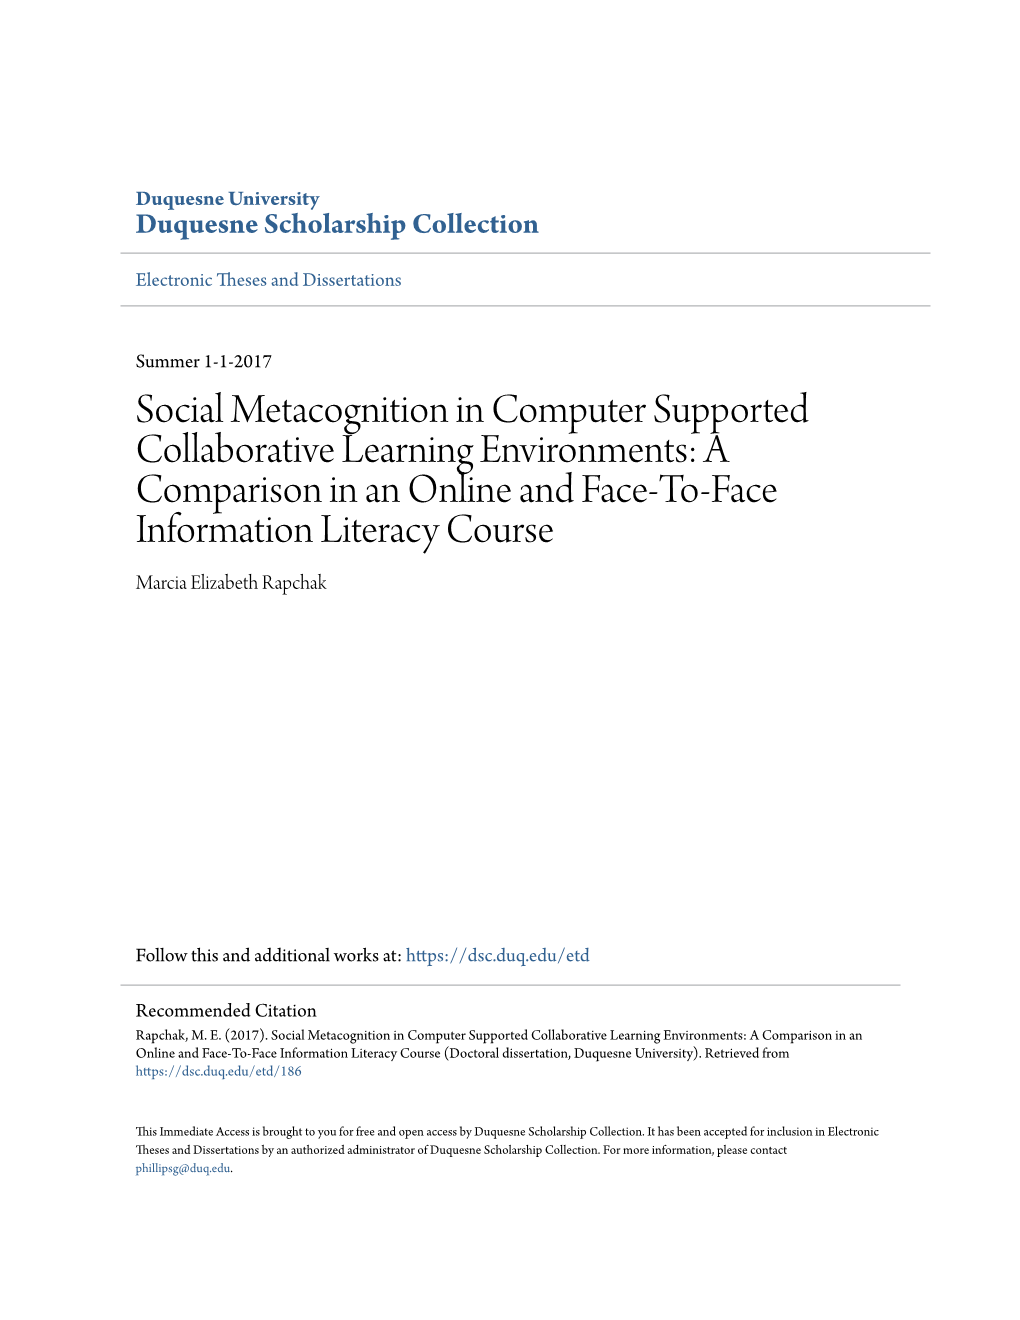 Social Metacognition in Computer Supported Collaborative Learning